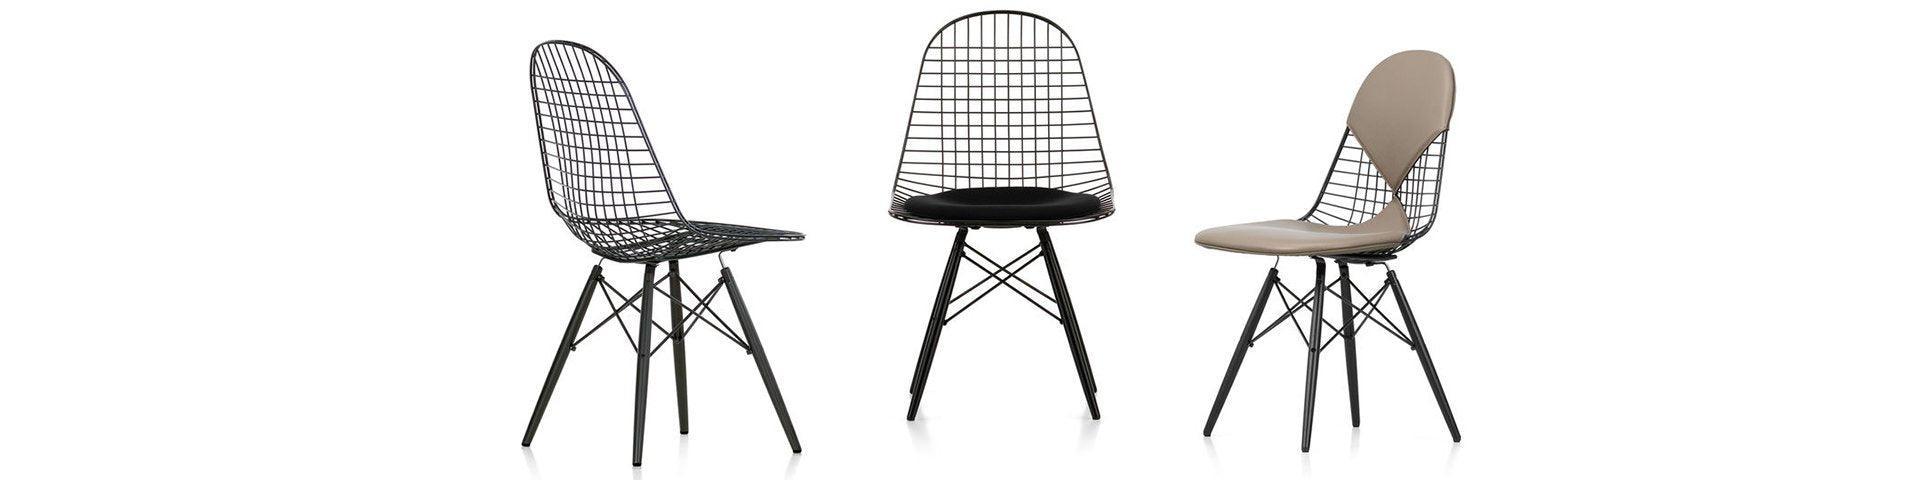 Eames DKW wire chair with upholstery, 1951